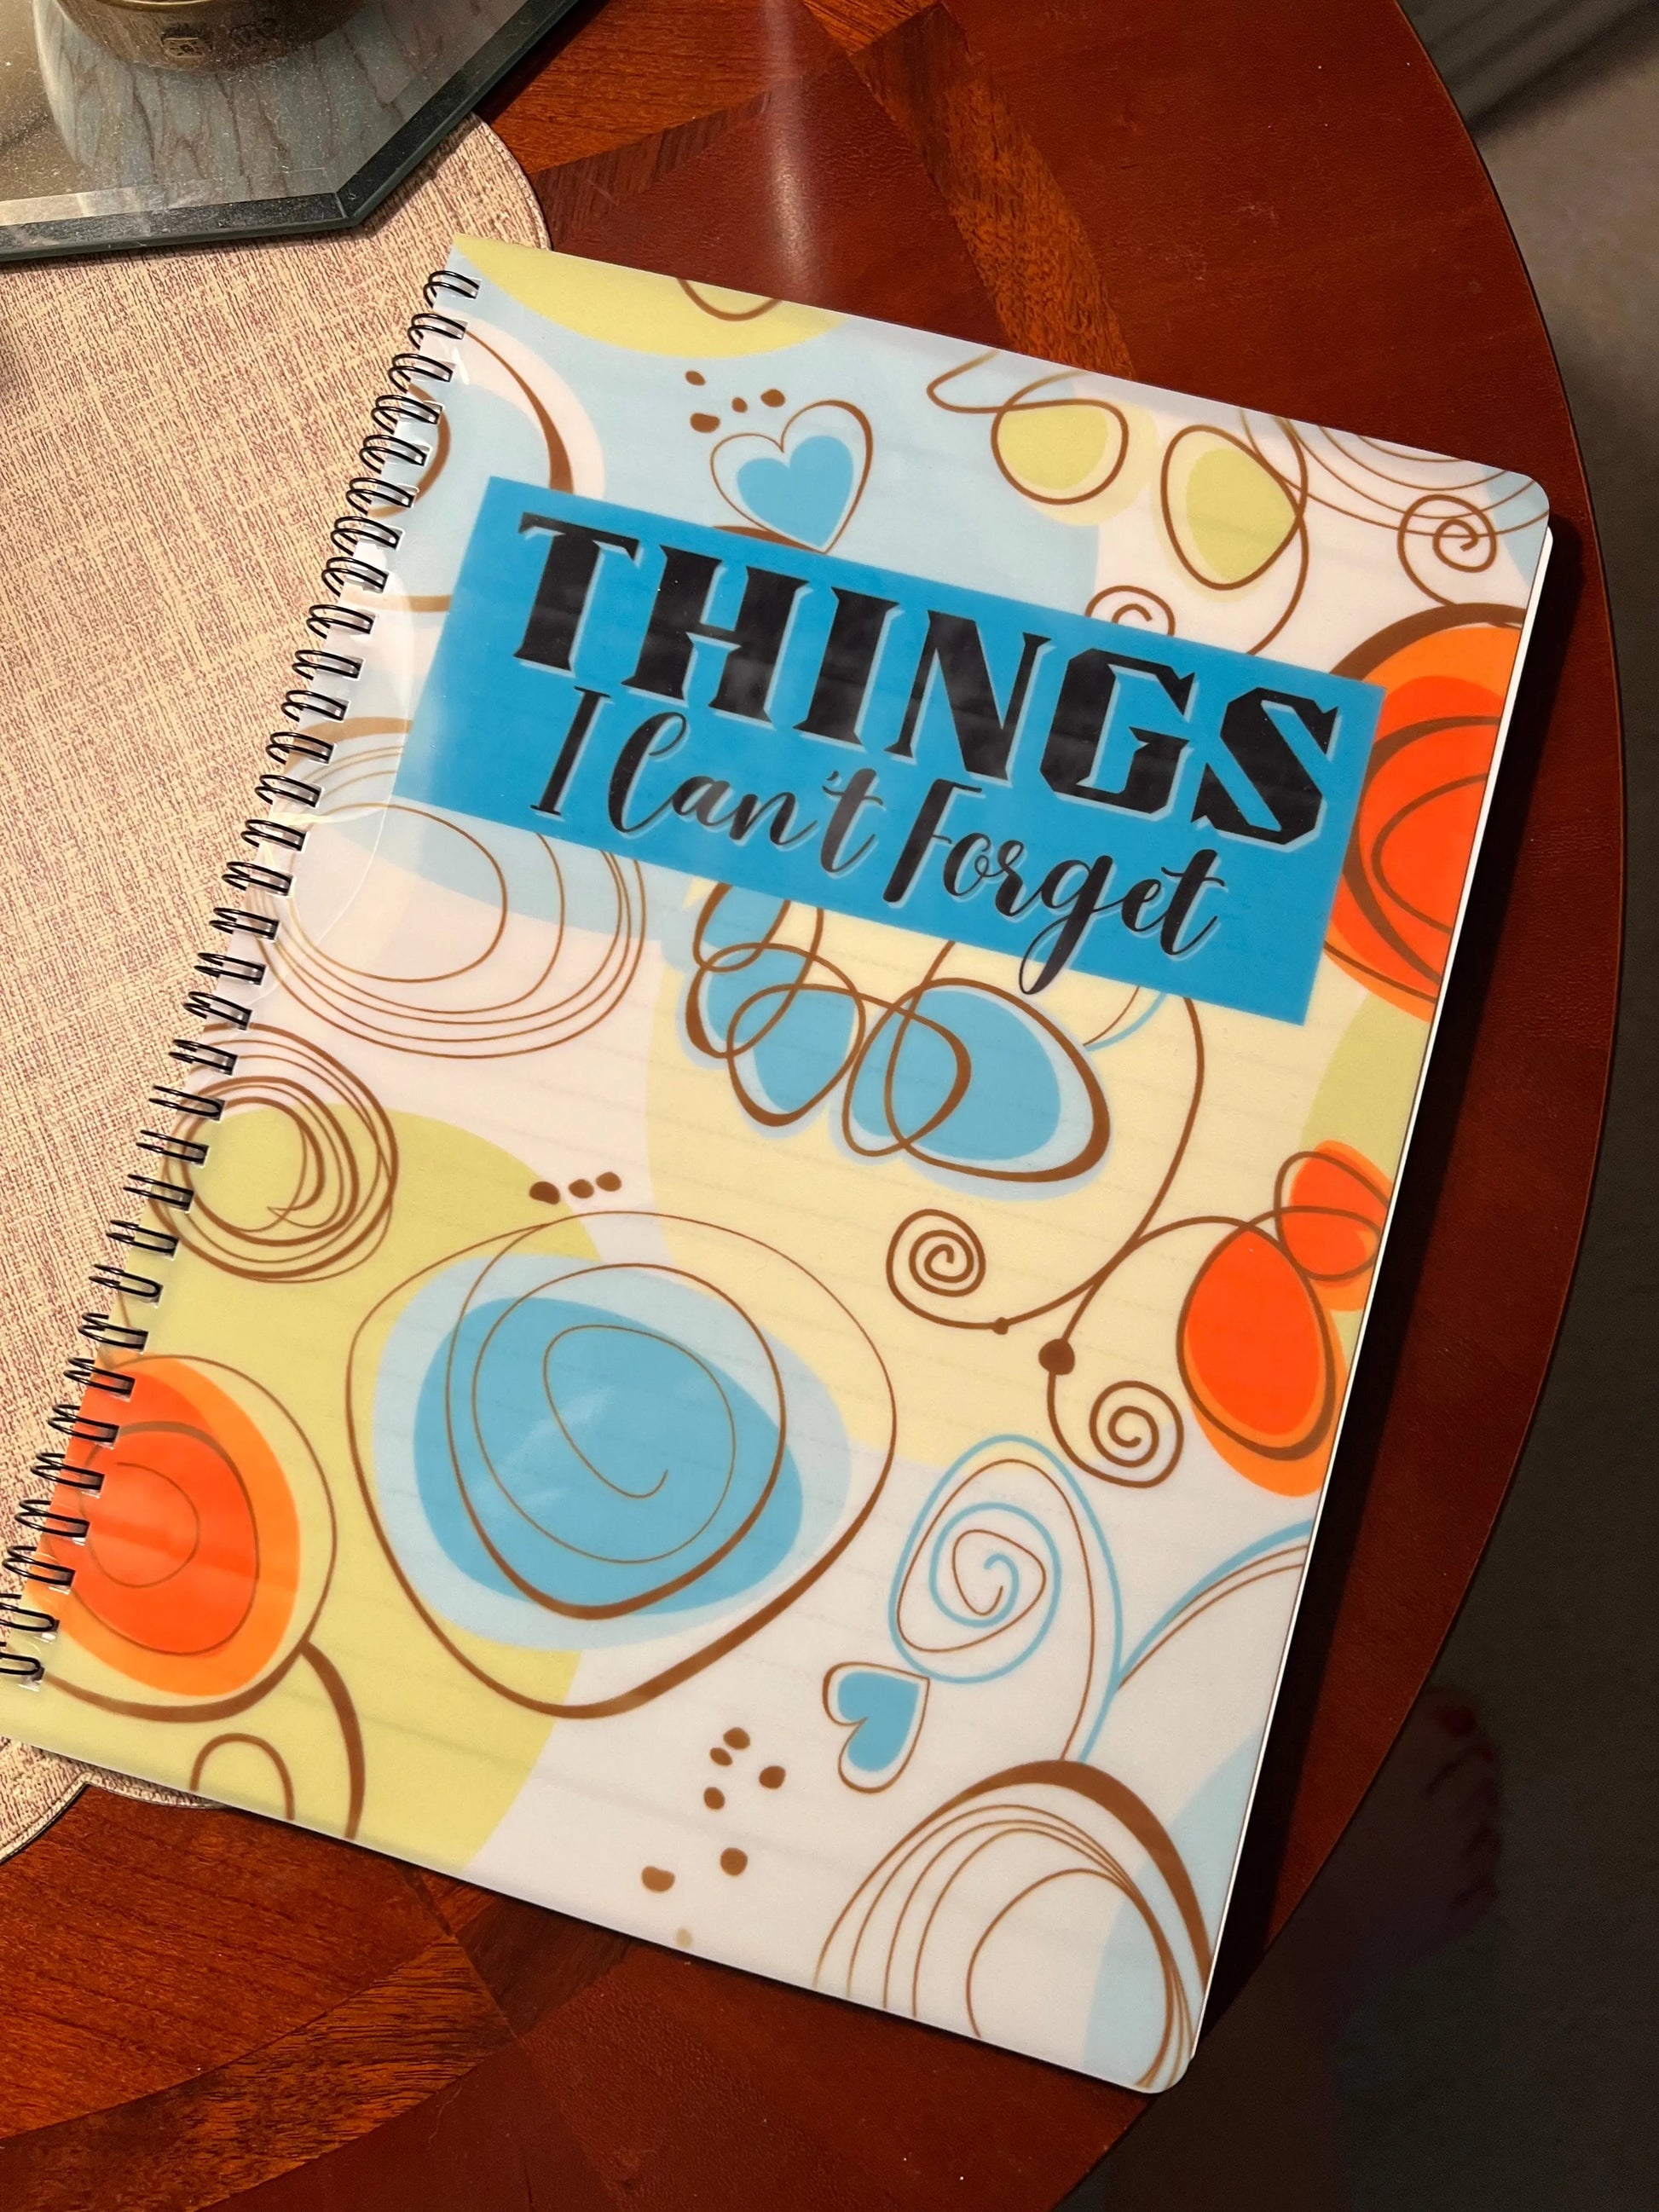 Spiral Notebook (Ruled) Letter Size Teal 8.5 X 11 Things I Can't Forget Cedar Hill Country Market